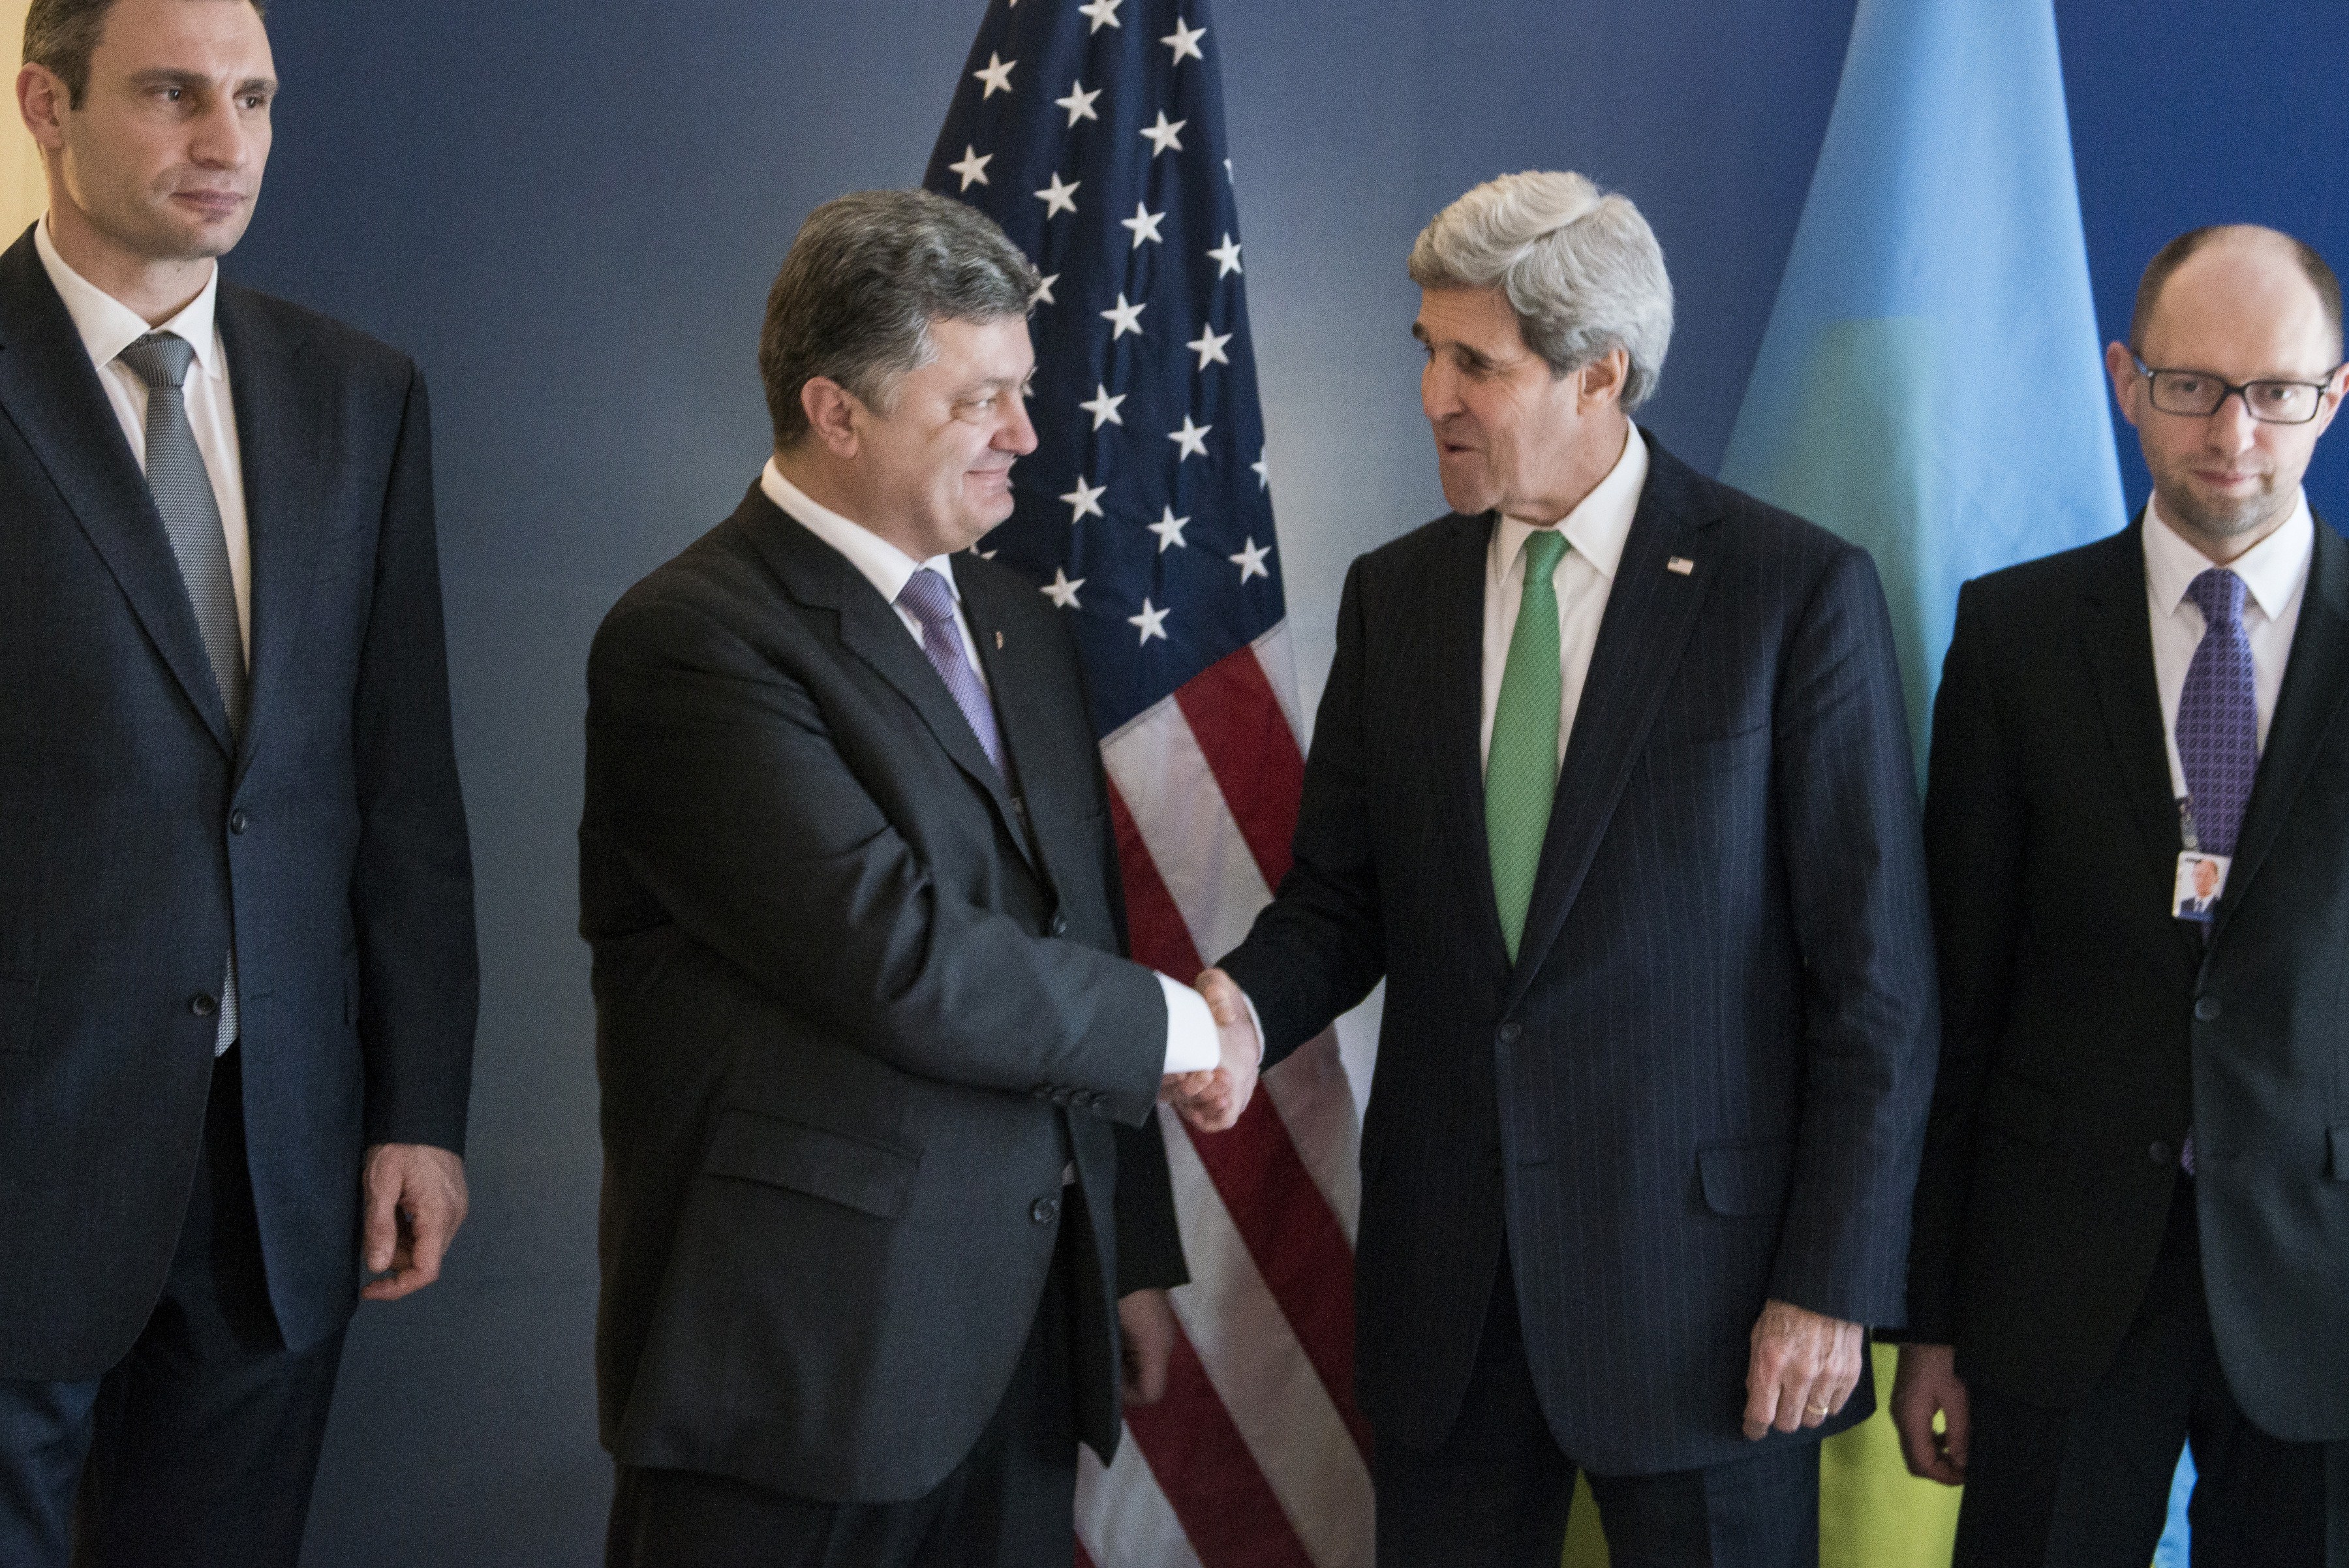 From Left: Vitali Klitschko, the head of the Ukrainian UDAR (Punch) party, Ukrainian businessman and politician Petro Poroshenko, U.S. Secretary of State John Kerry and Ukrainian opposition leader Arseniy Yatsenyuk prior to a meeting during the Munich Security Conference at the Bayerischer Hof Hotel in Munich, on Feb. 1, 2014. (Brendan Smialowski / AFP / Getty Images)